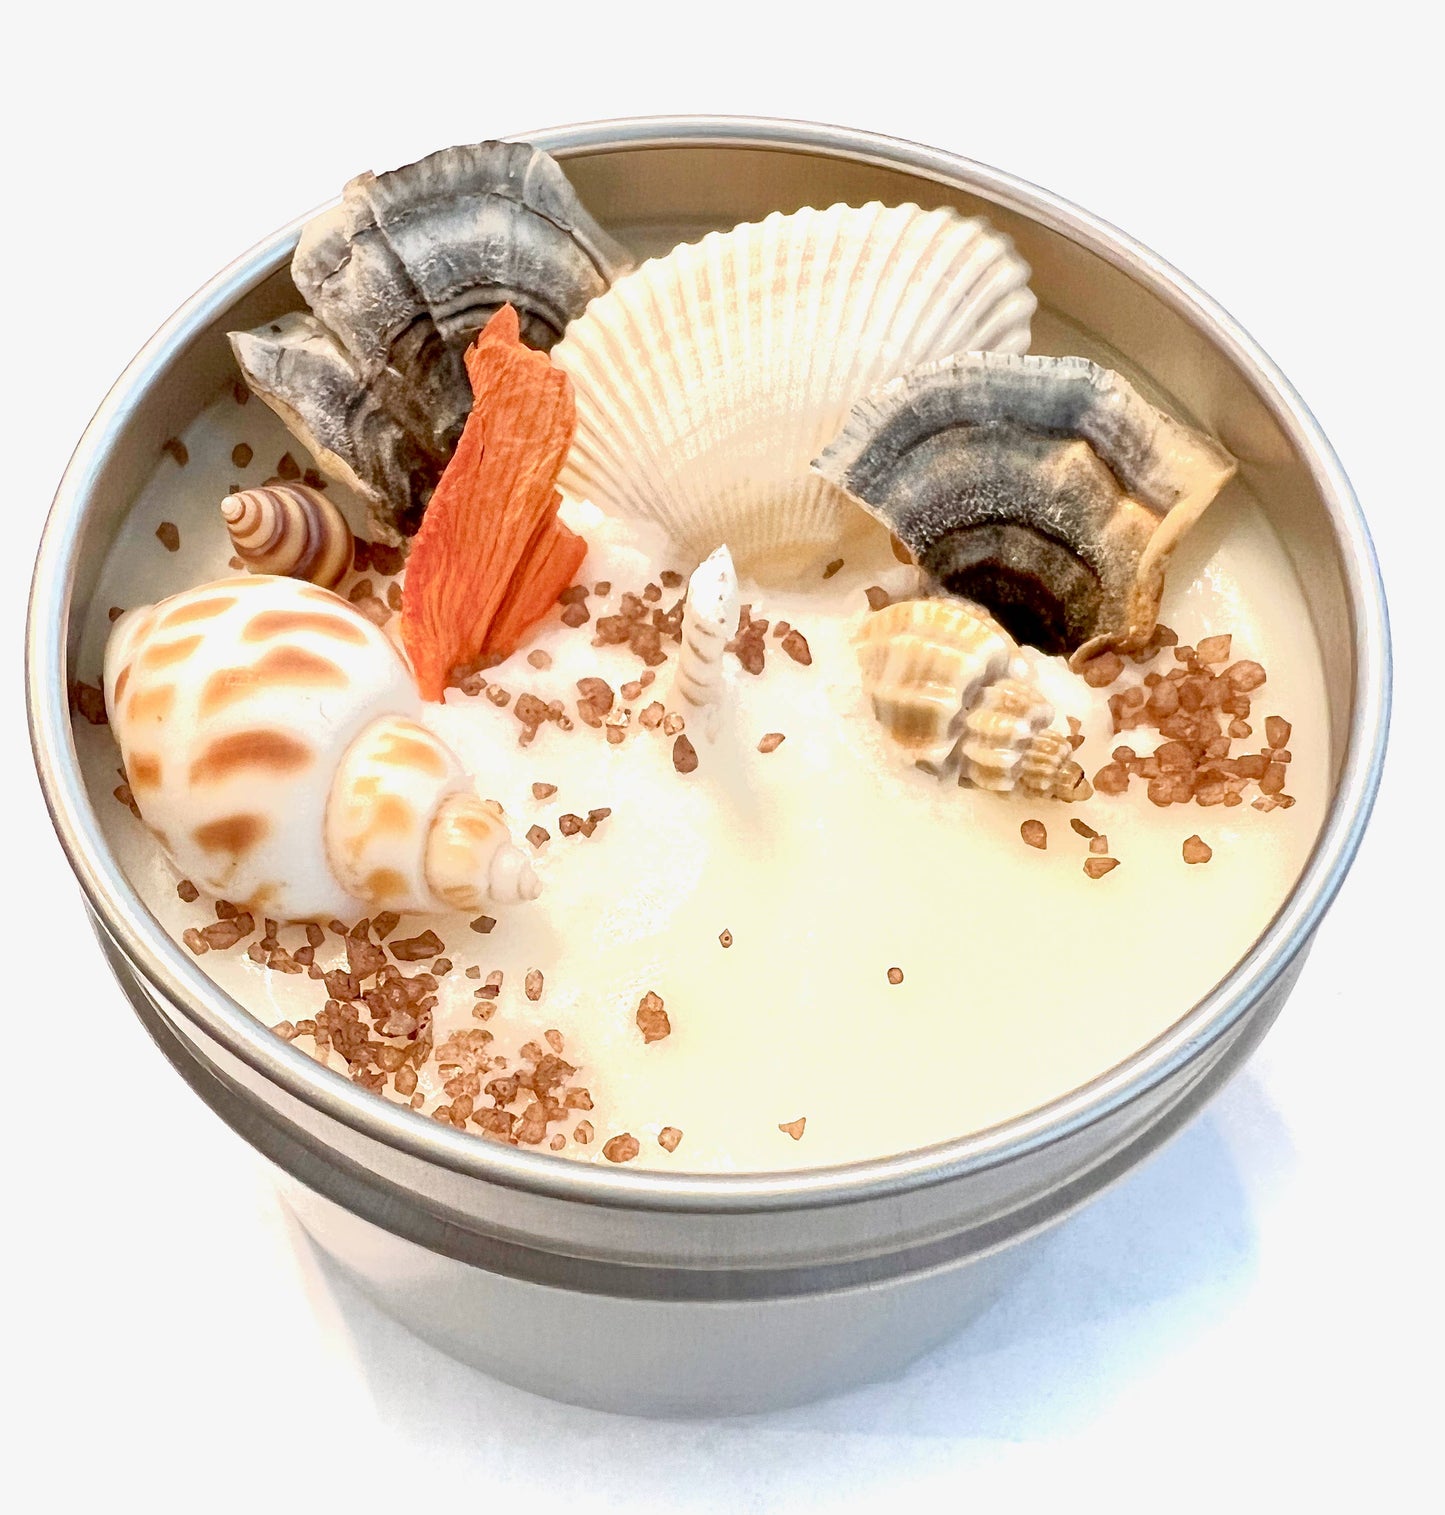 Coral Reef: 4 oz Artisanal Soy Candle